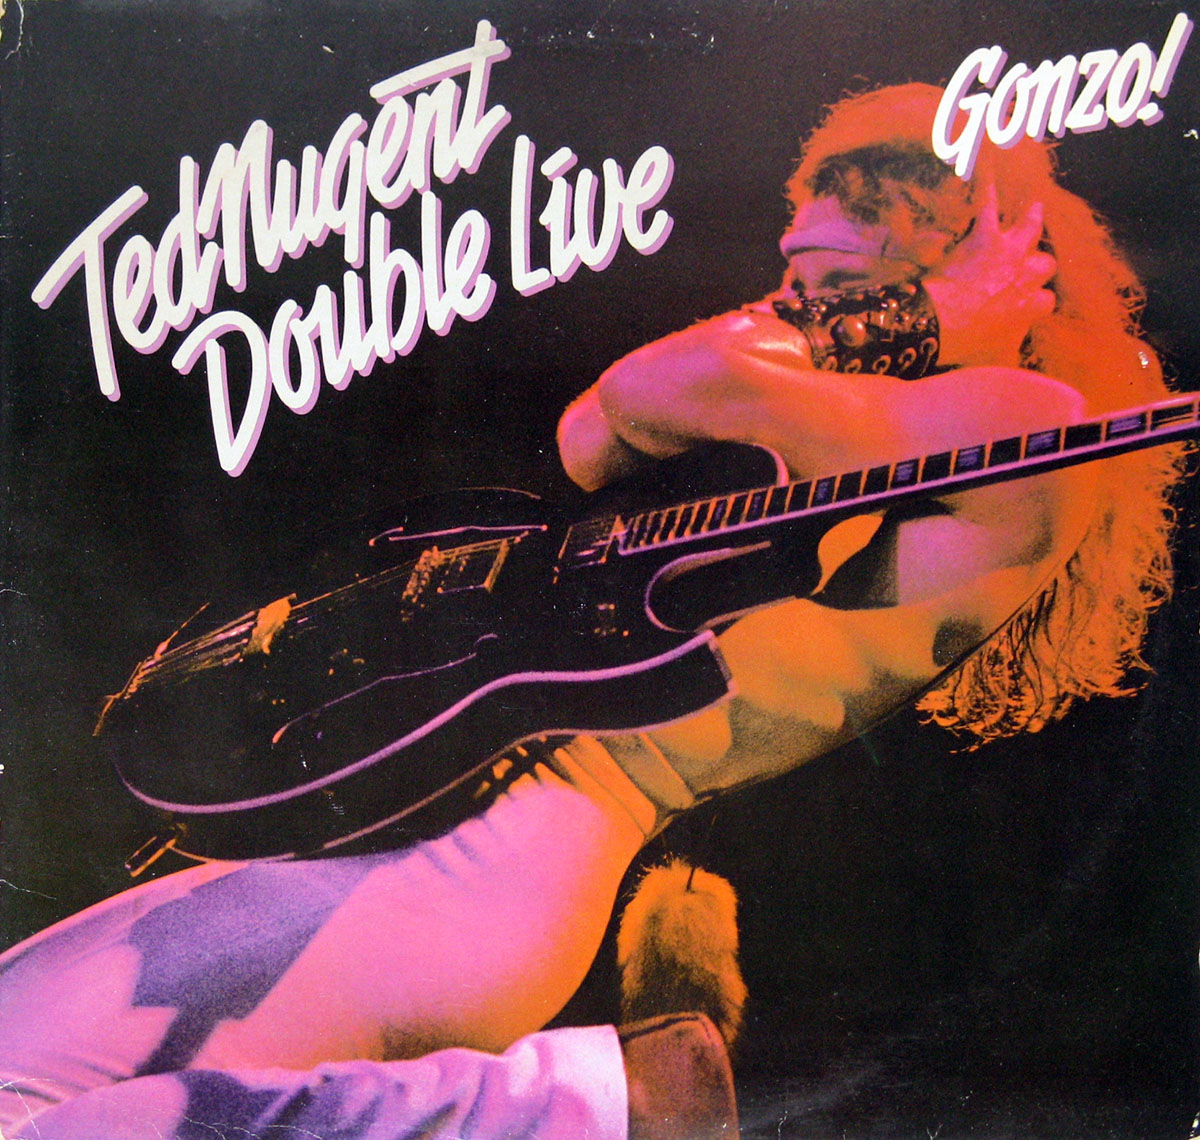 High Resolution Photos of ted nugent double live gonzo 